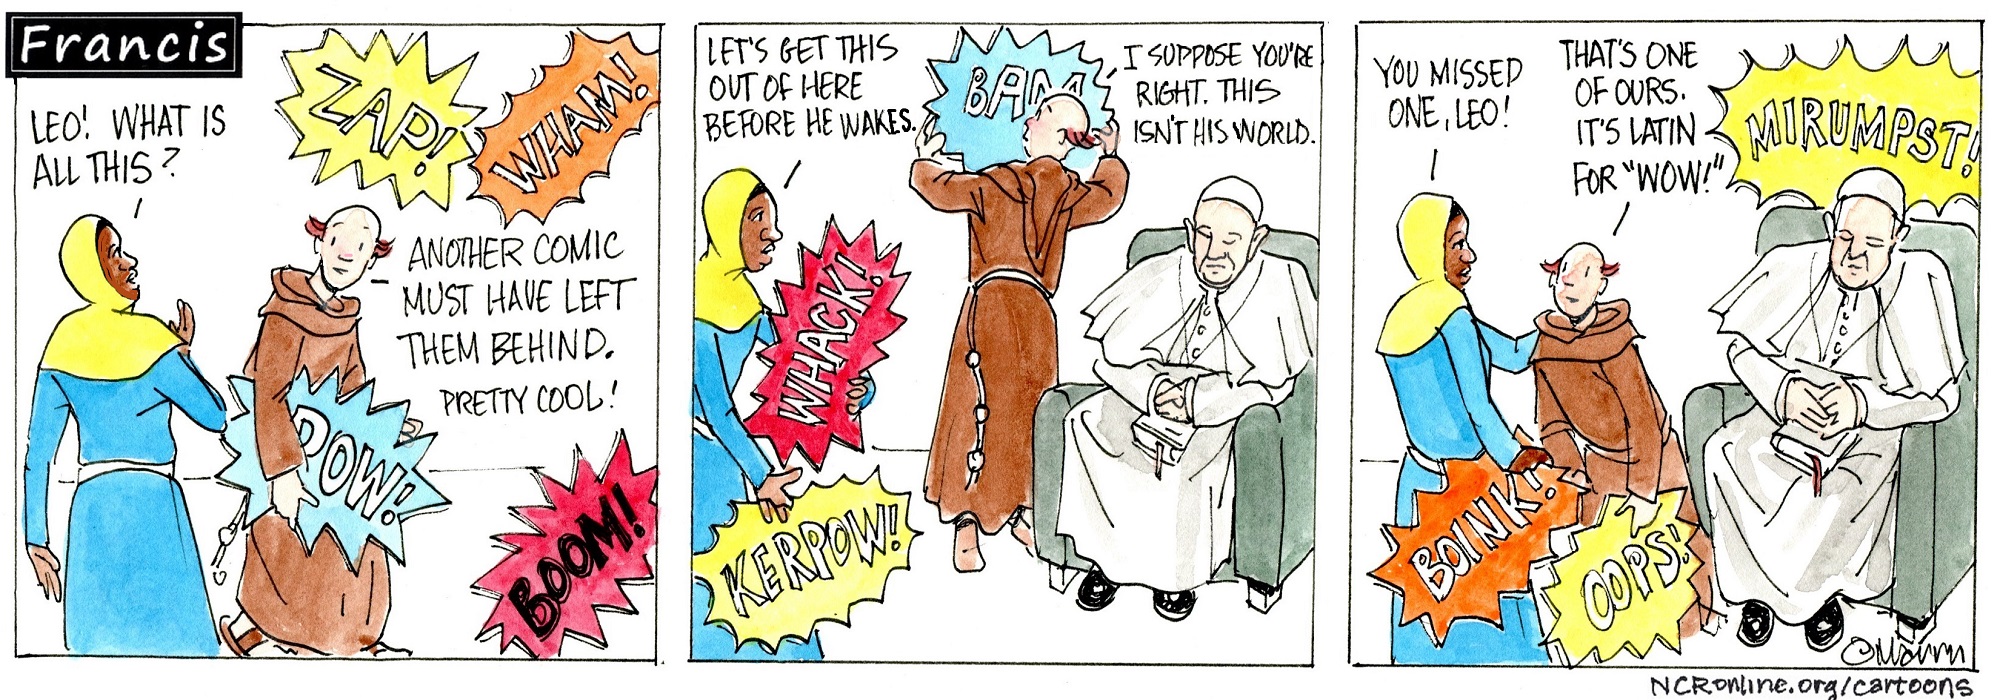 Francis, the comic strip: "ZAP! WHAM! BOOM!" This was all left behind.